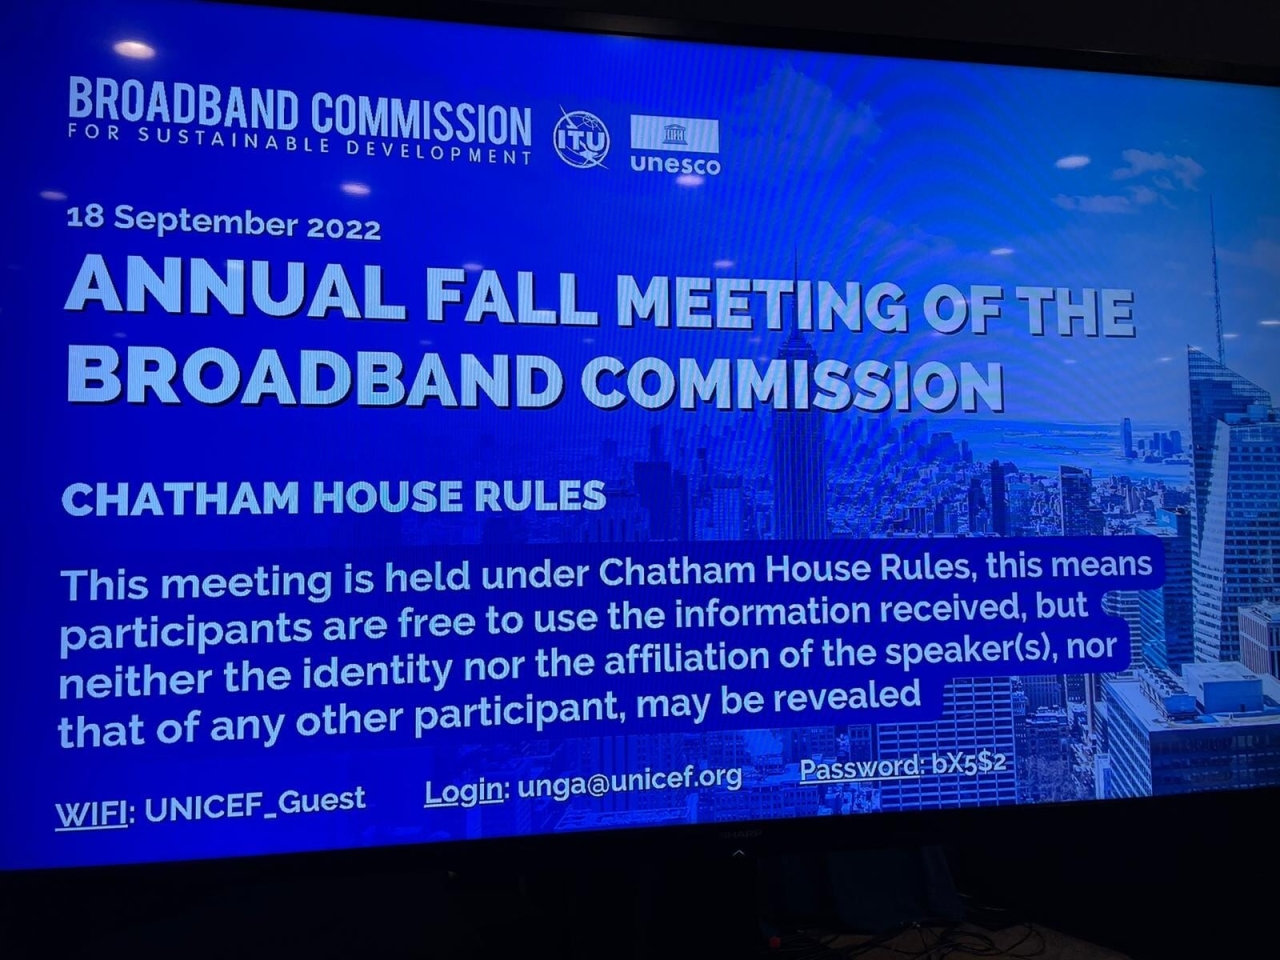 Presentation on a large screen "Annual fall meeting of the broadband commission" Chatham house rules.